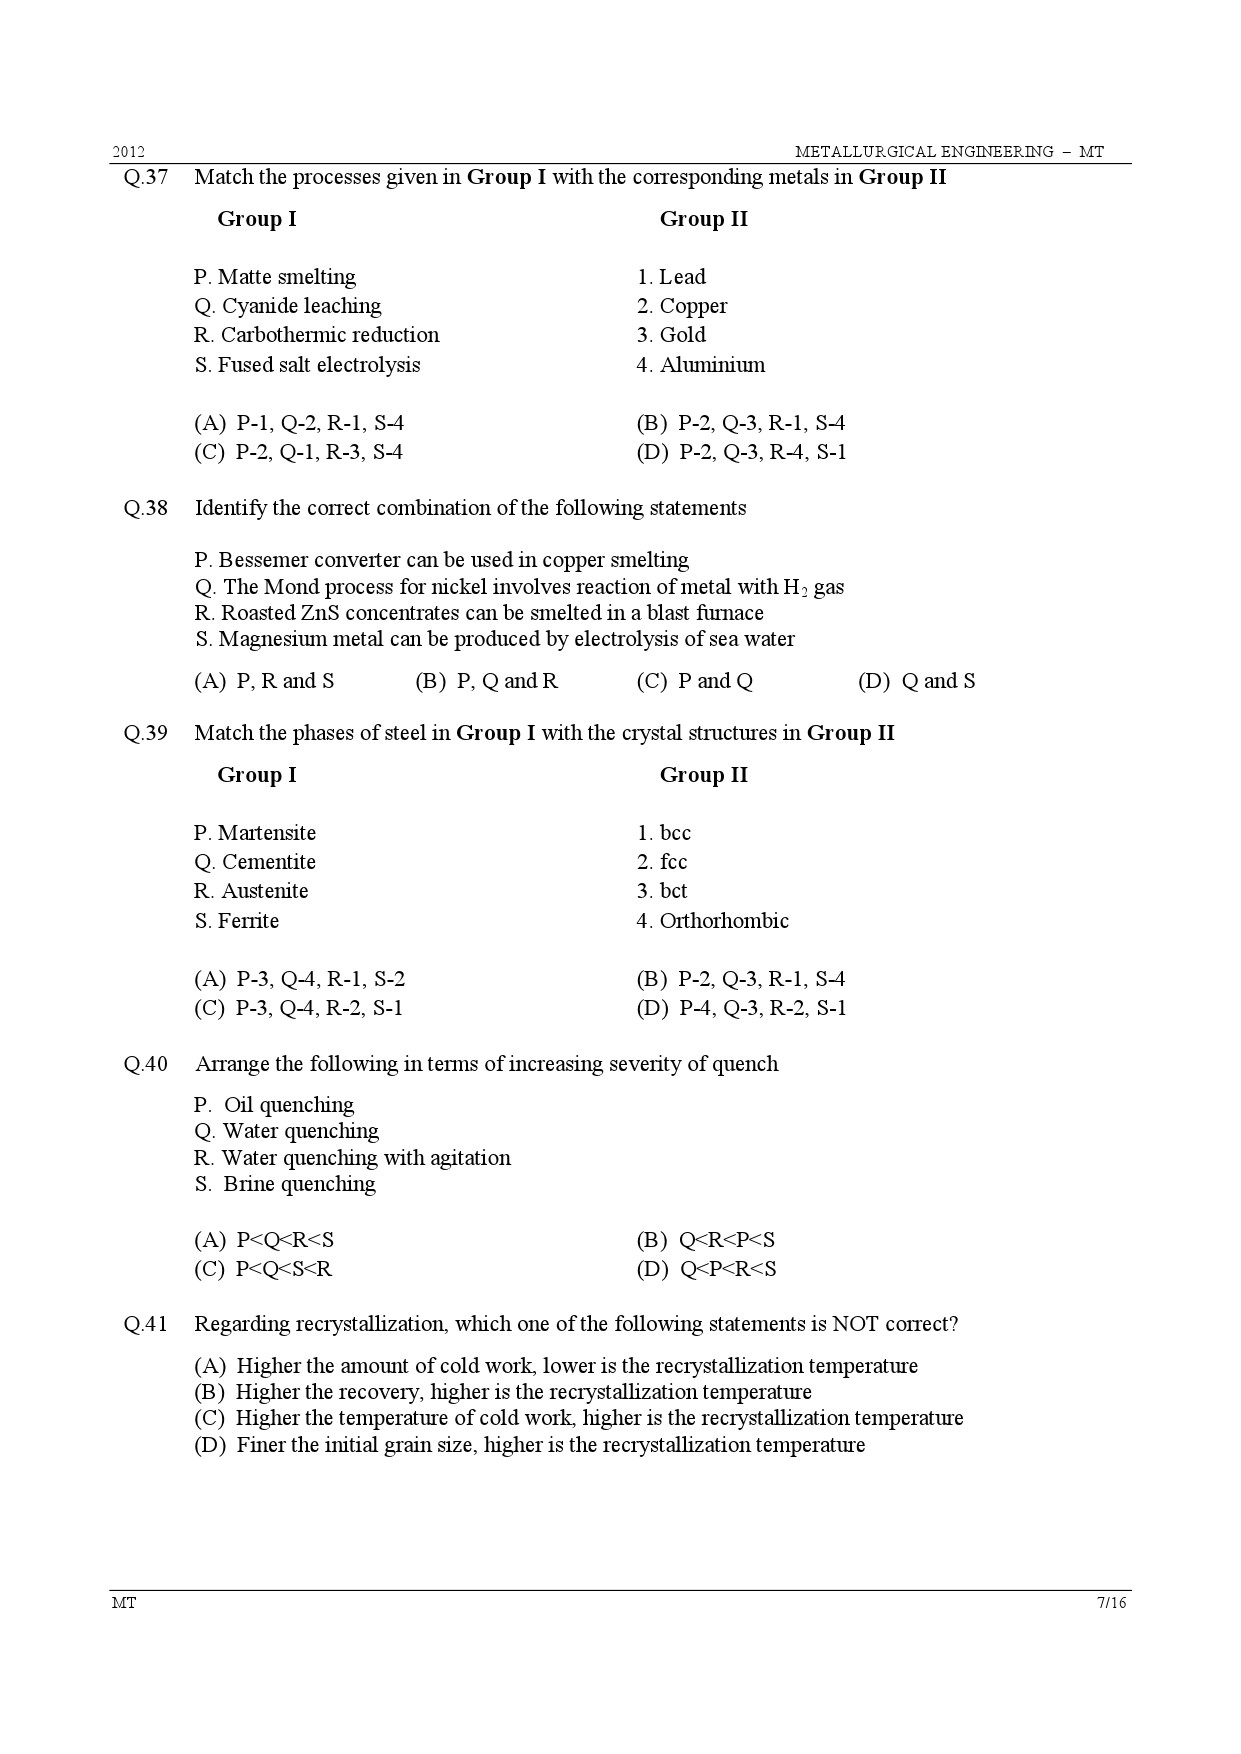 GATE Exam Question Paper 2012 Metallurgical Engineering 7